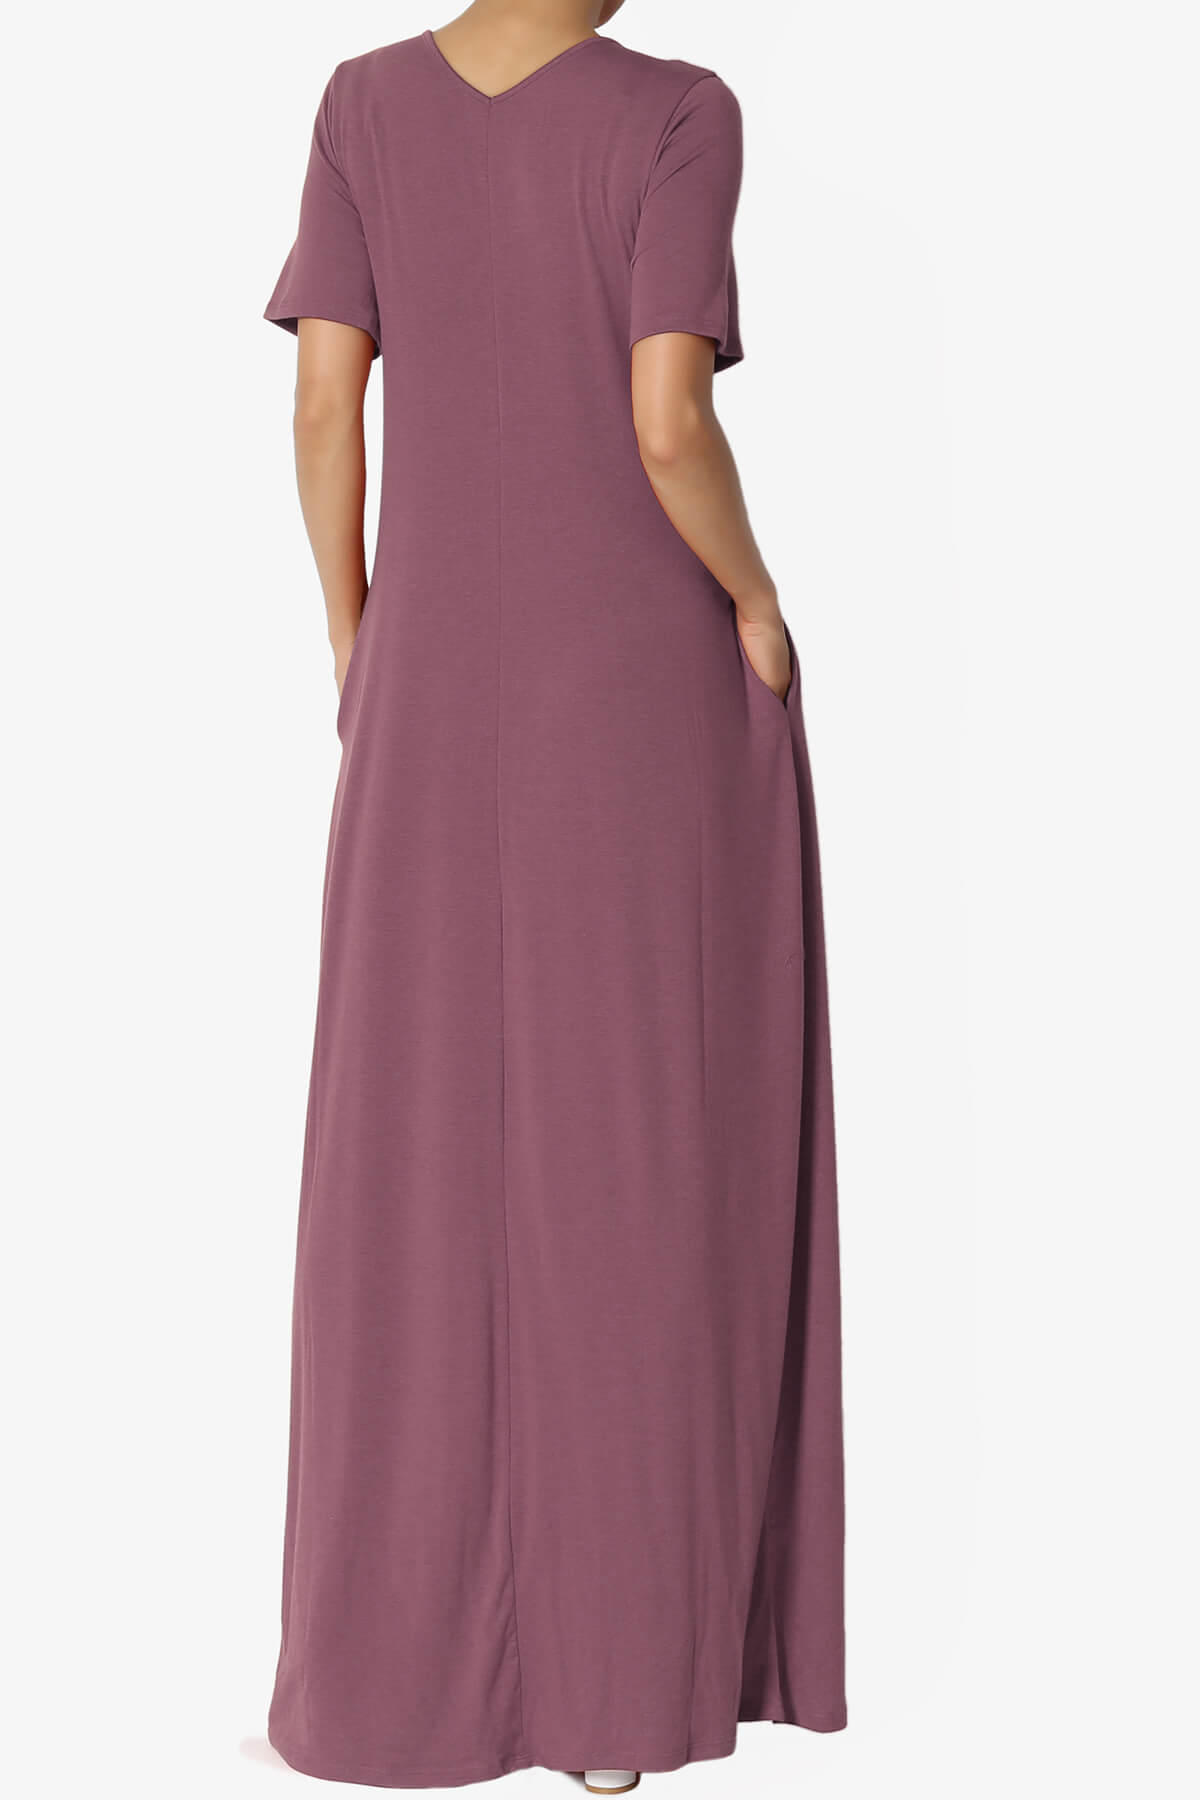 Load image into Gallery viewer, Vina Pocket Oversized Maxi Dress DUSTY PLUM_2
